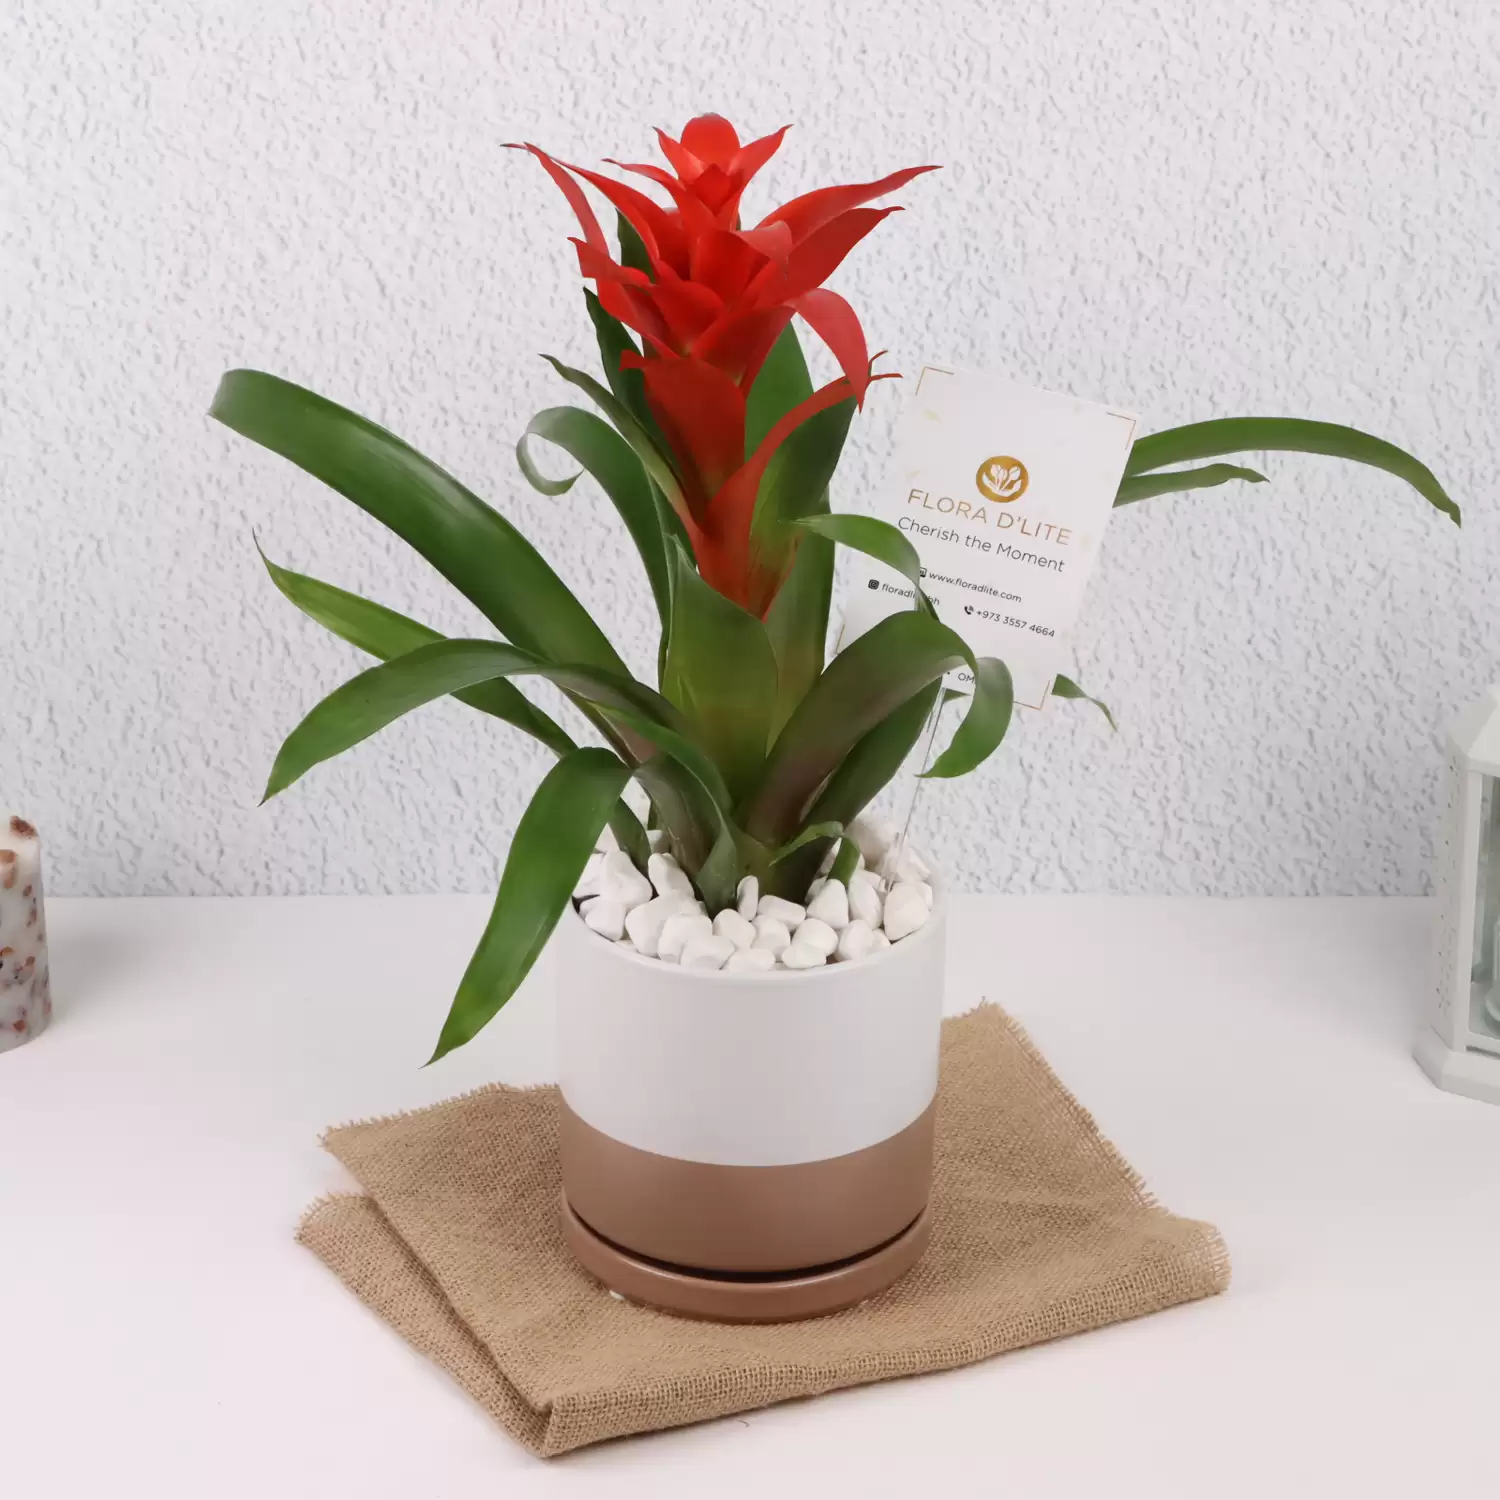 Red Guzmania Potted Plant | Gift Plants For All Occasions | Bahrain Delivery - Flora D'lite